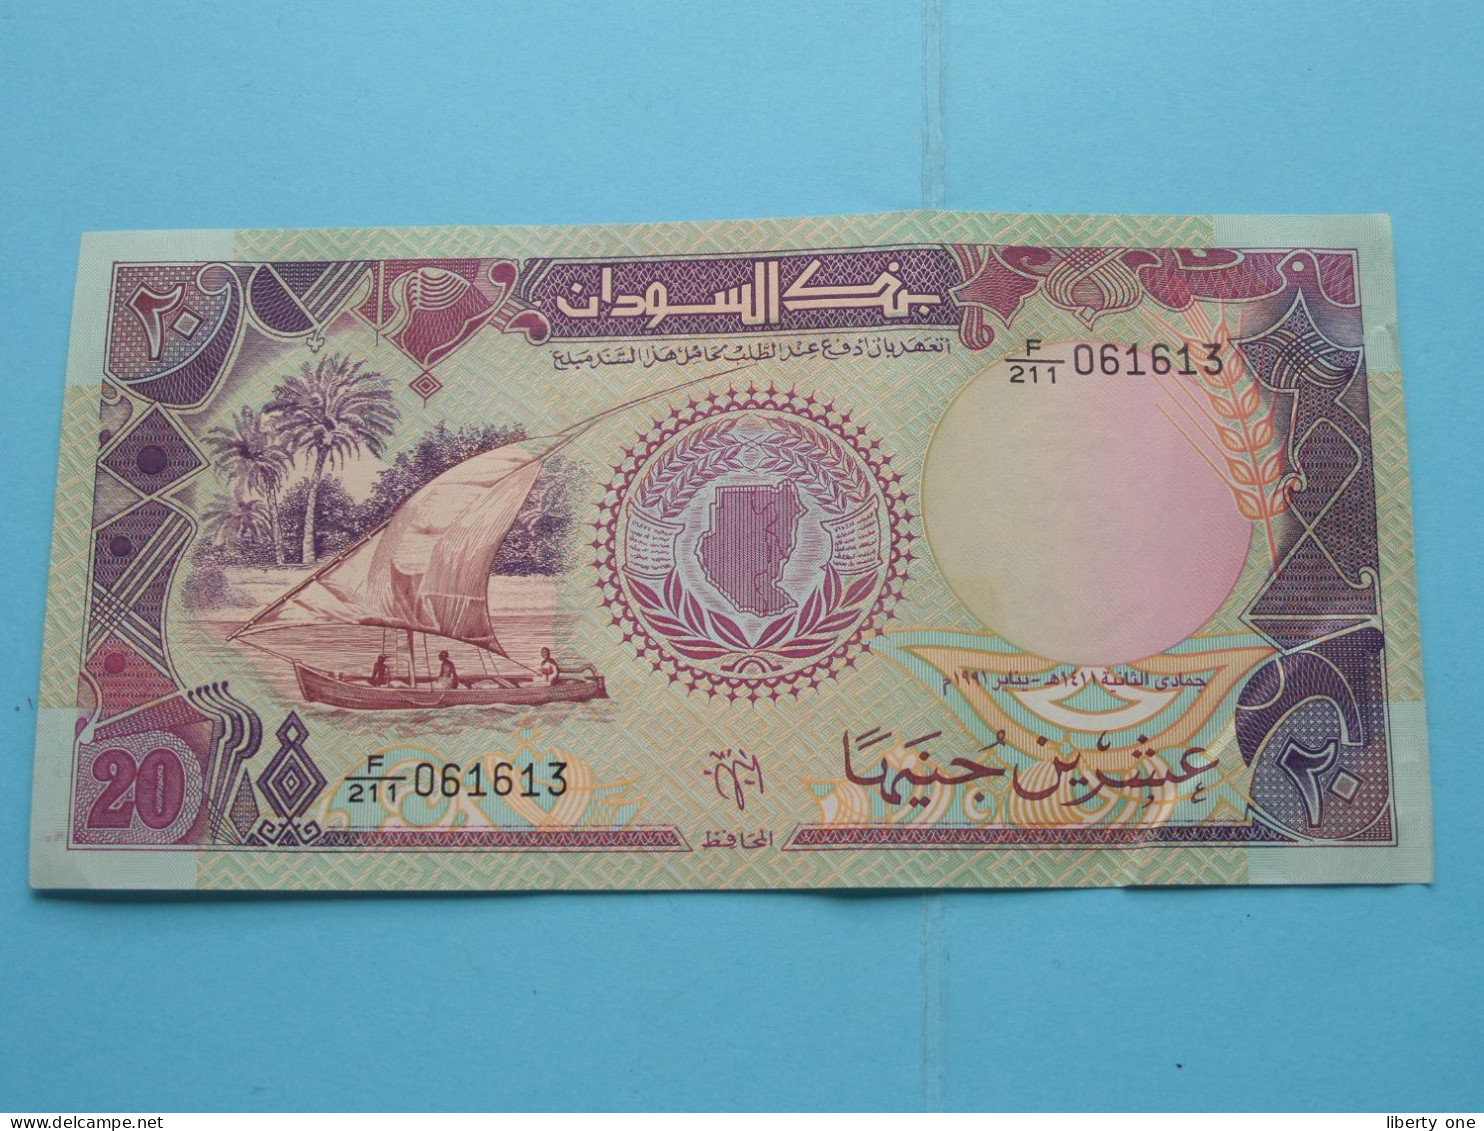 20 Sudanese Pounds ( F/211 061613 ) Bank Of SUDAN () 1991 ( For Grade See SCAN ) XF ! - Soedan